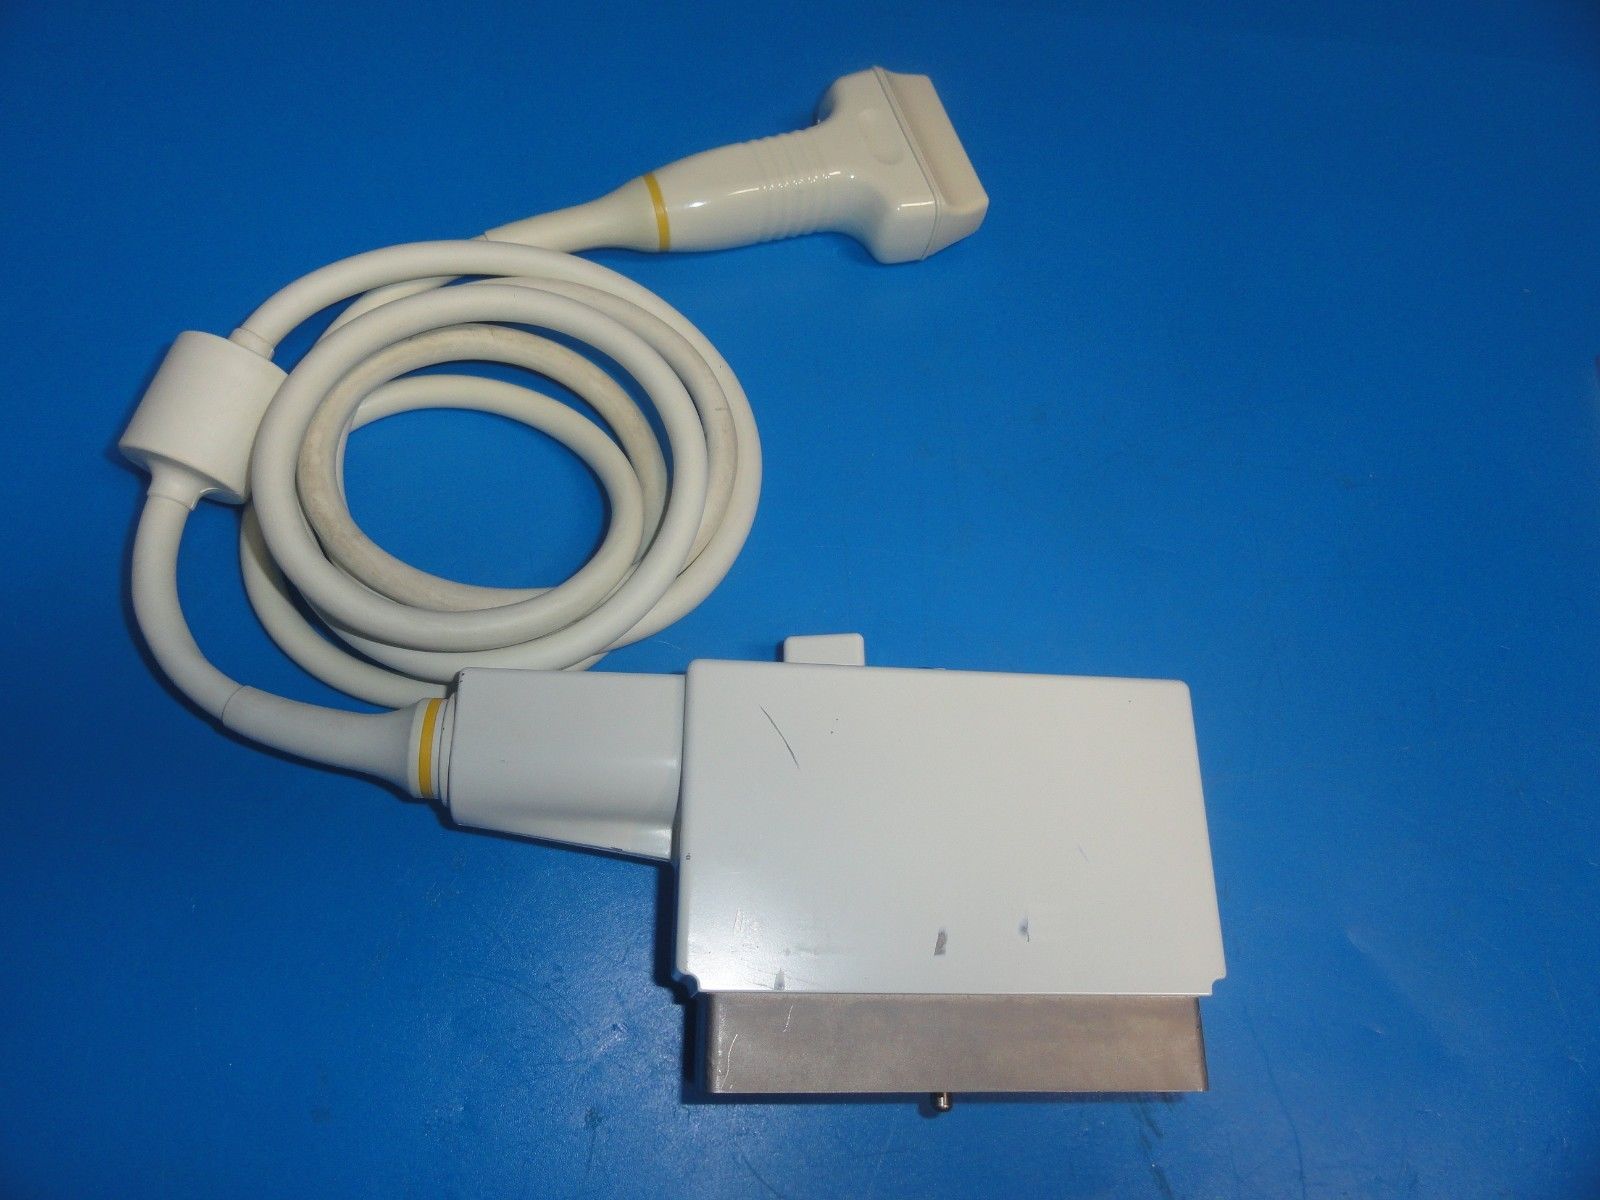 GE 546L P/N 2259132 Vascular Small Parts Linear Array Probe for GE Vivid 3 /6045 DIAGNOSTIC ULTRASOUND MACHINES FOR SALE